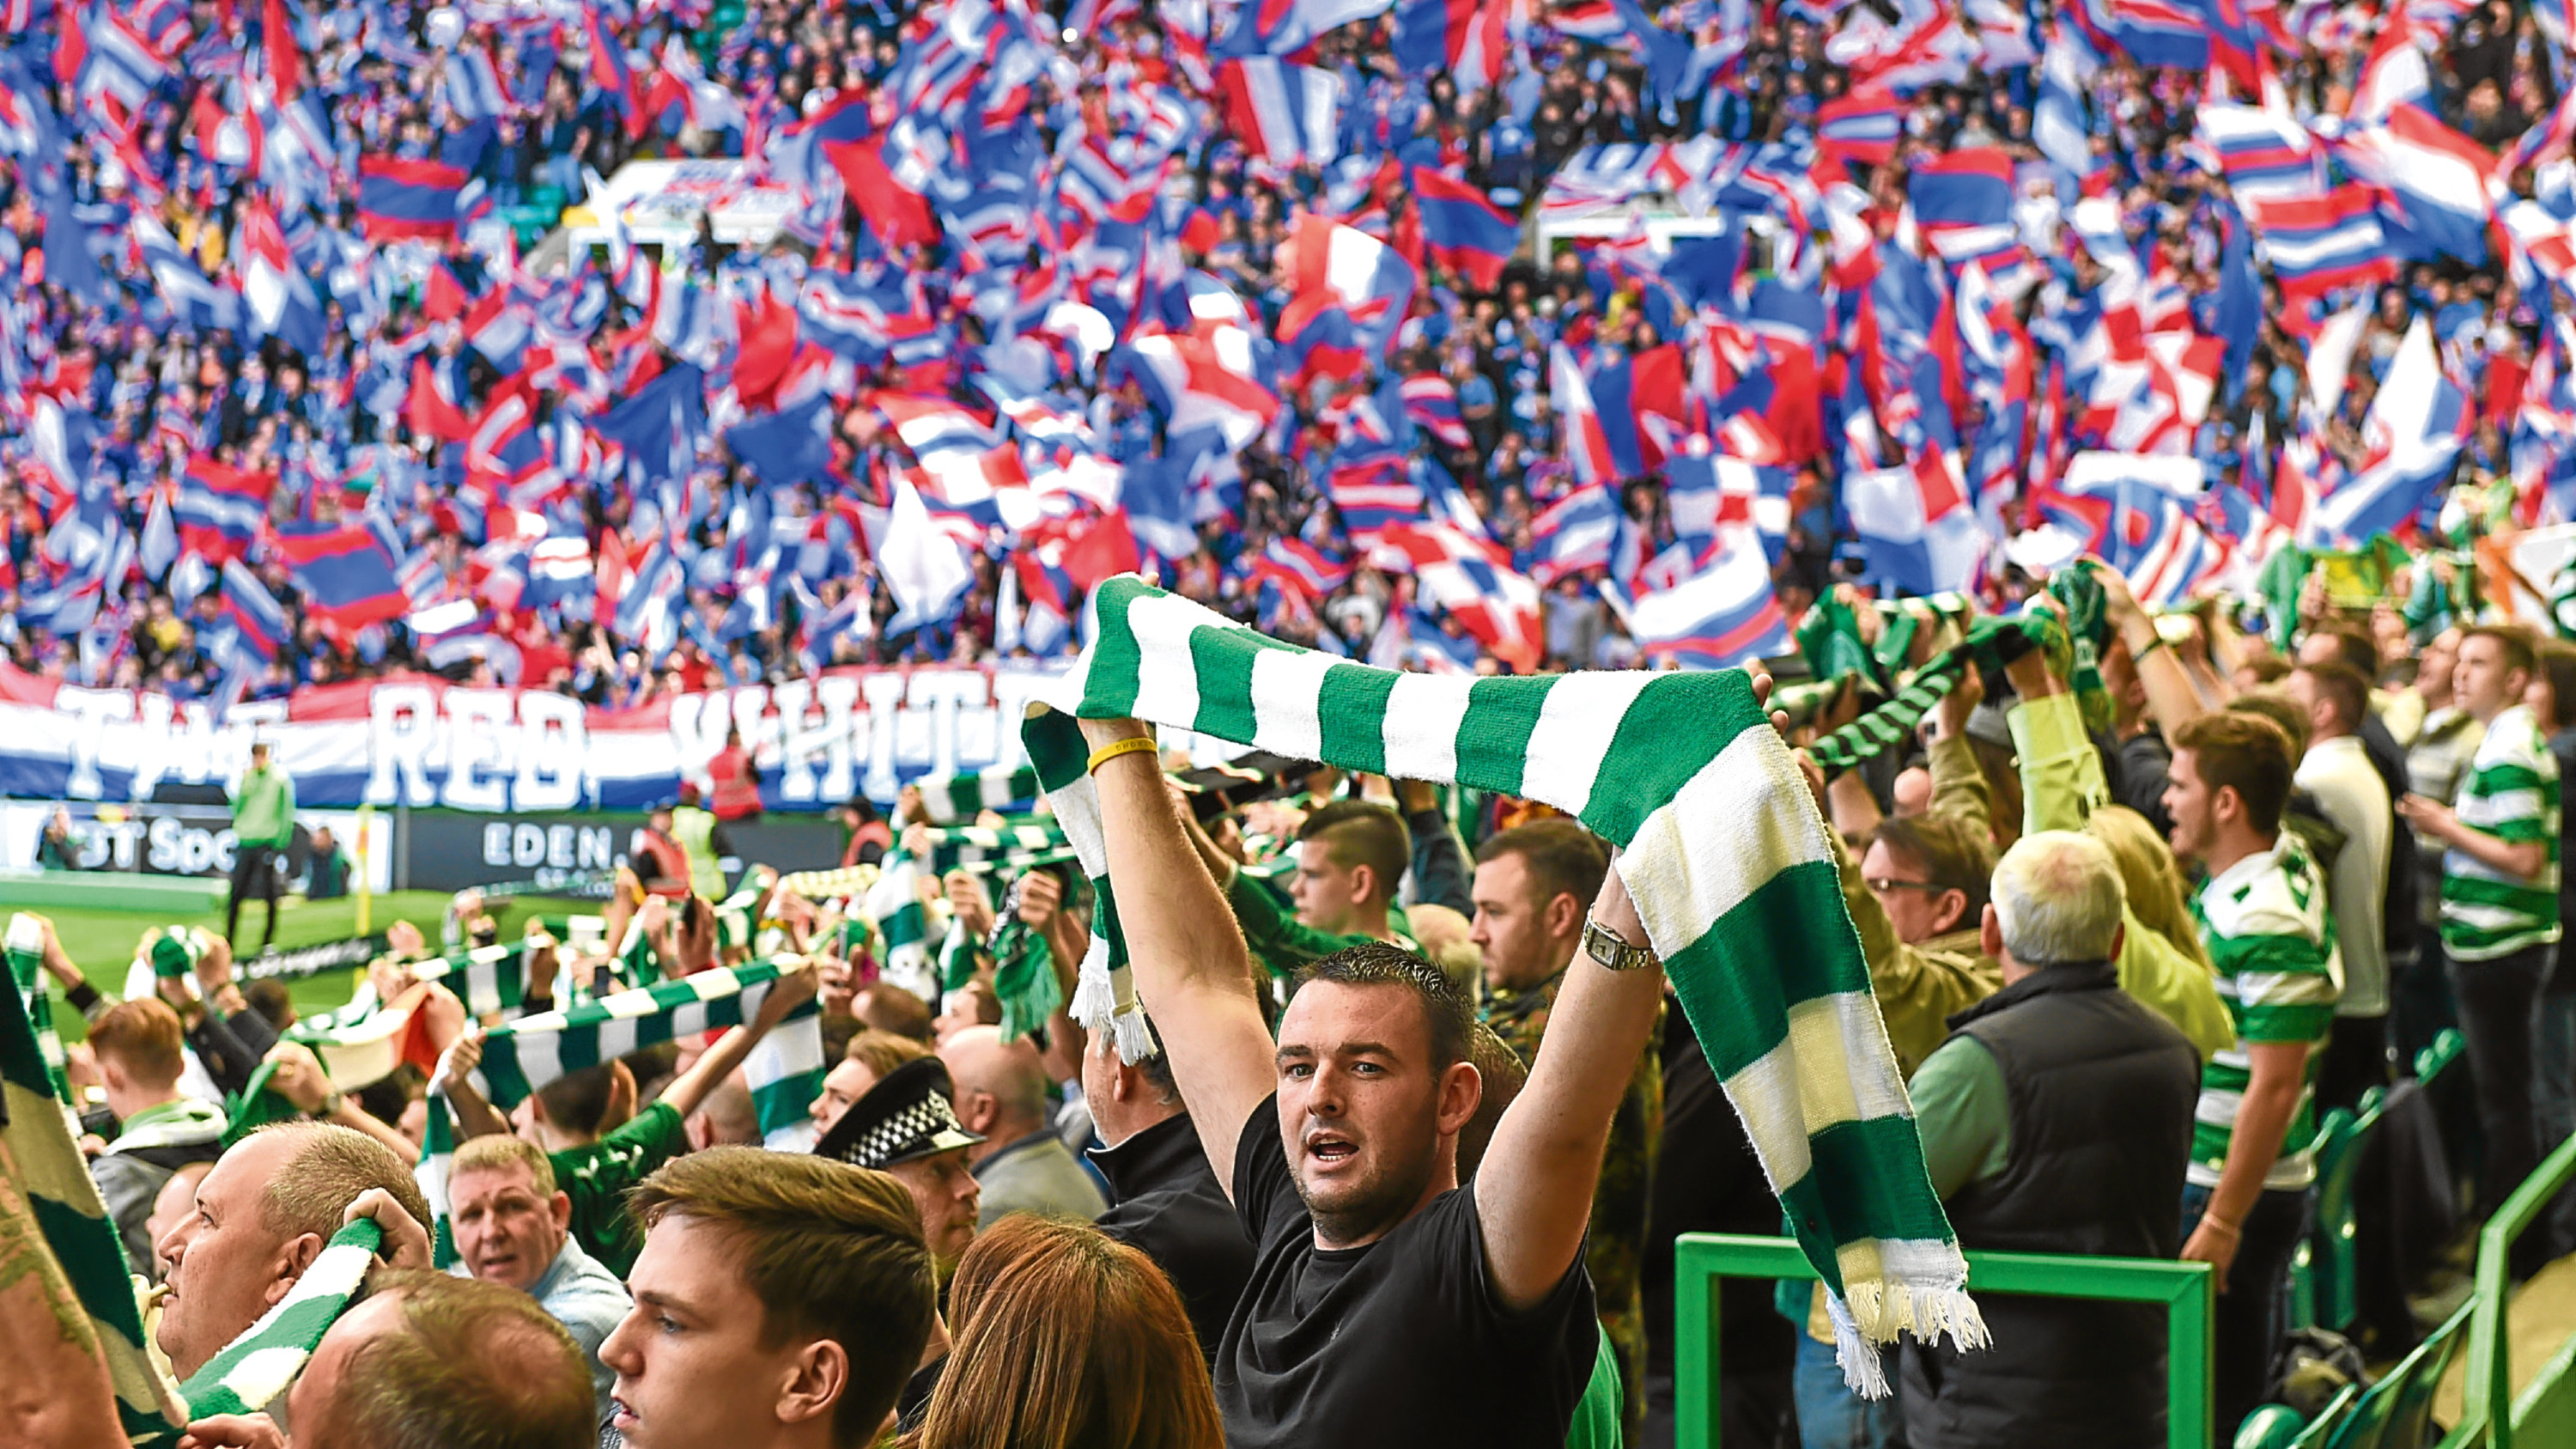 Celtic and Rangers fans